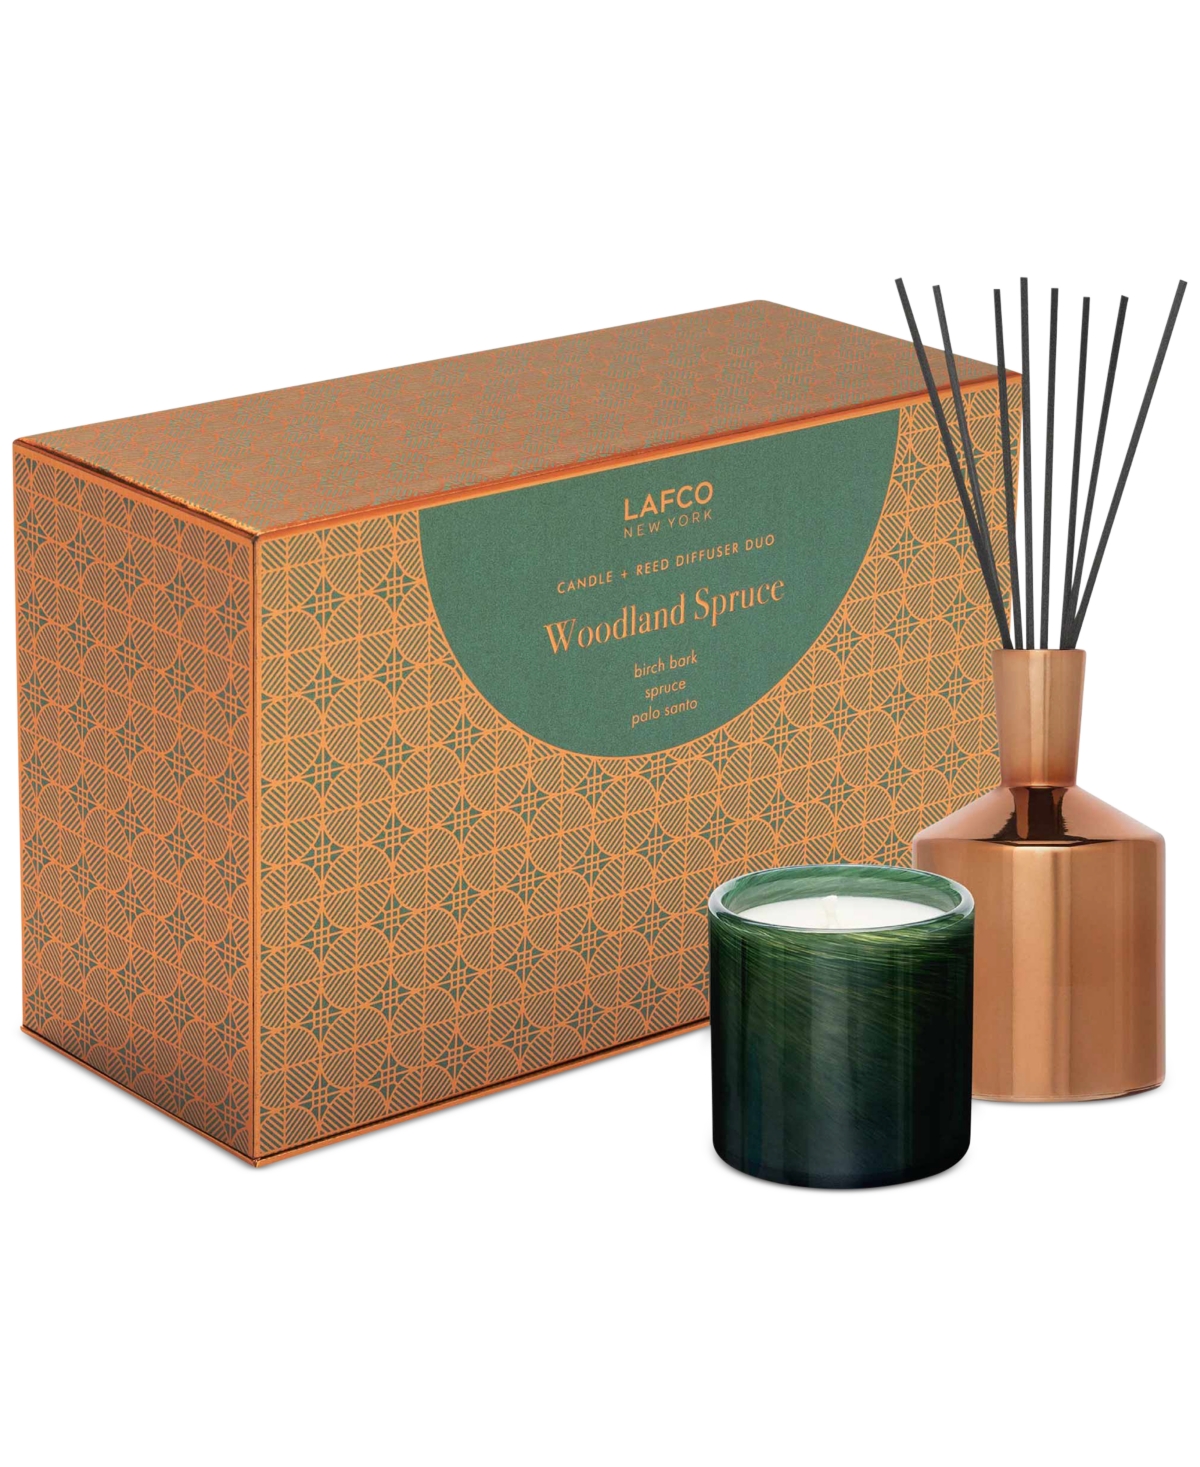 Lafco New York 2-pc. Woodland Spruce Candle & Reed Diffuser Gift Set